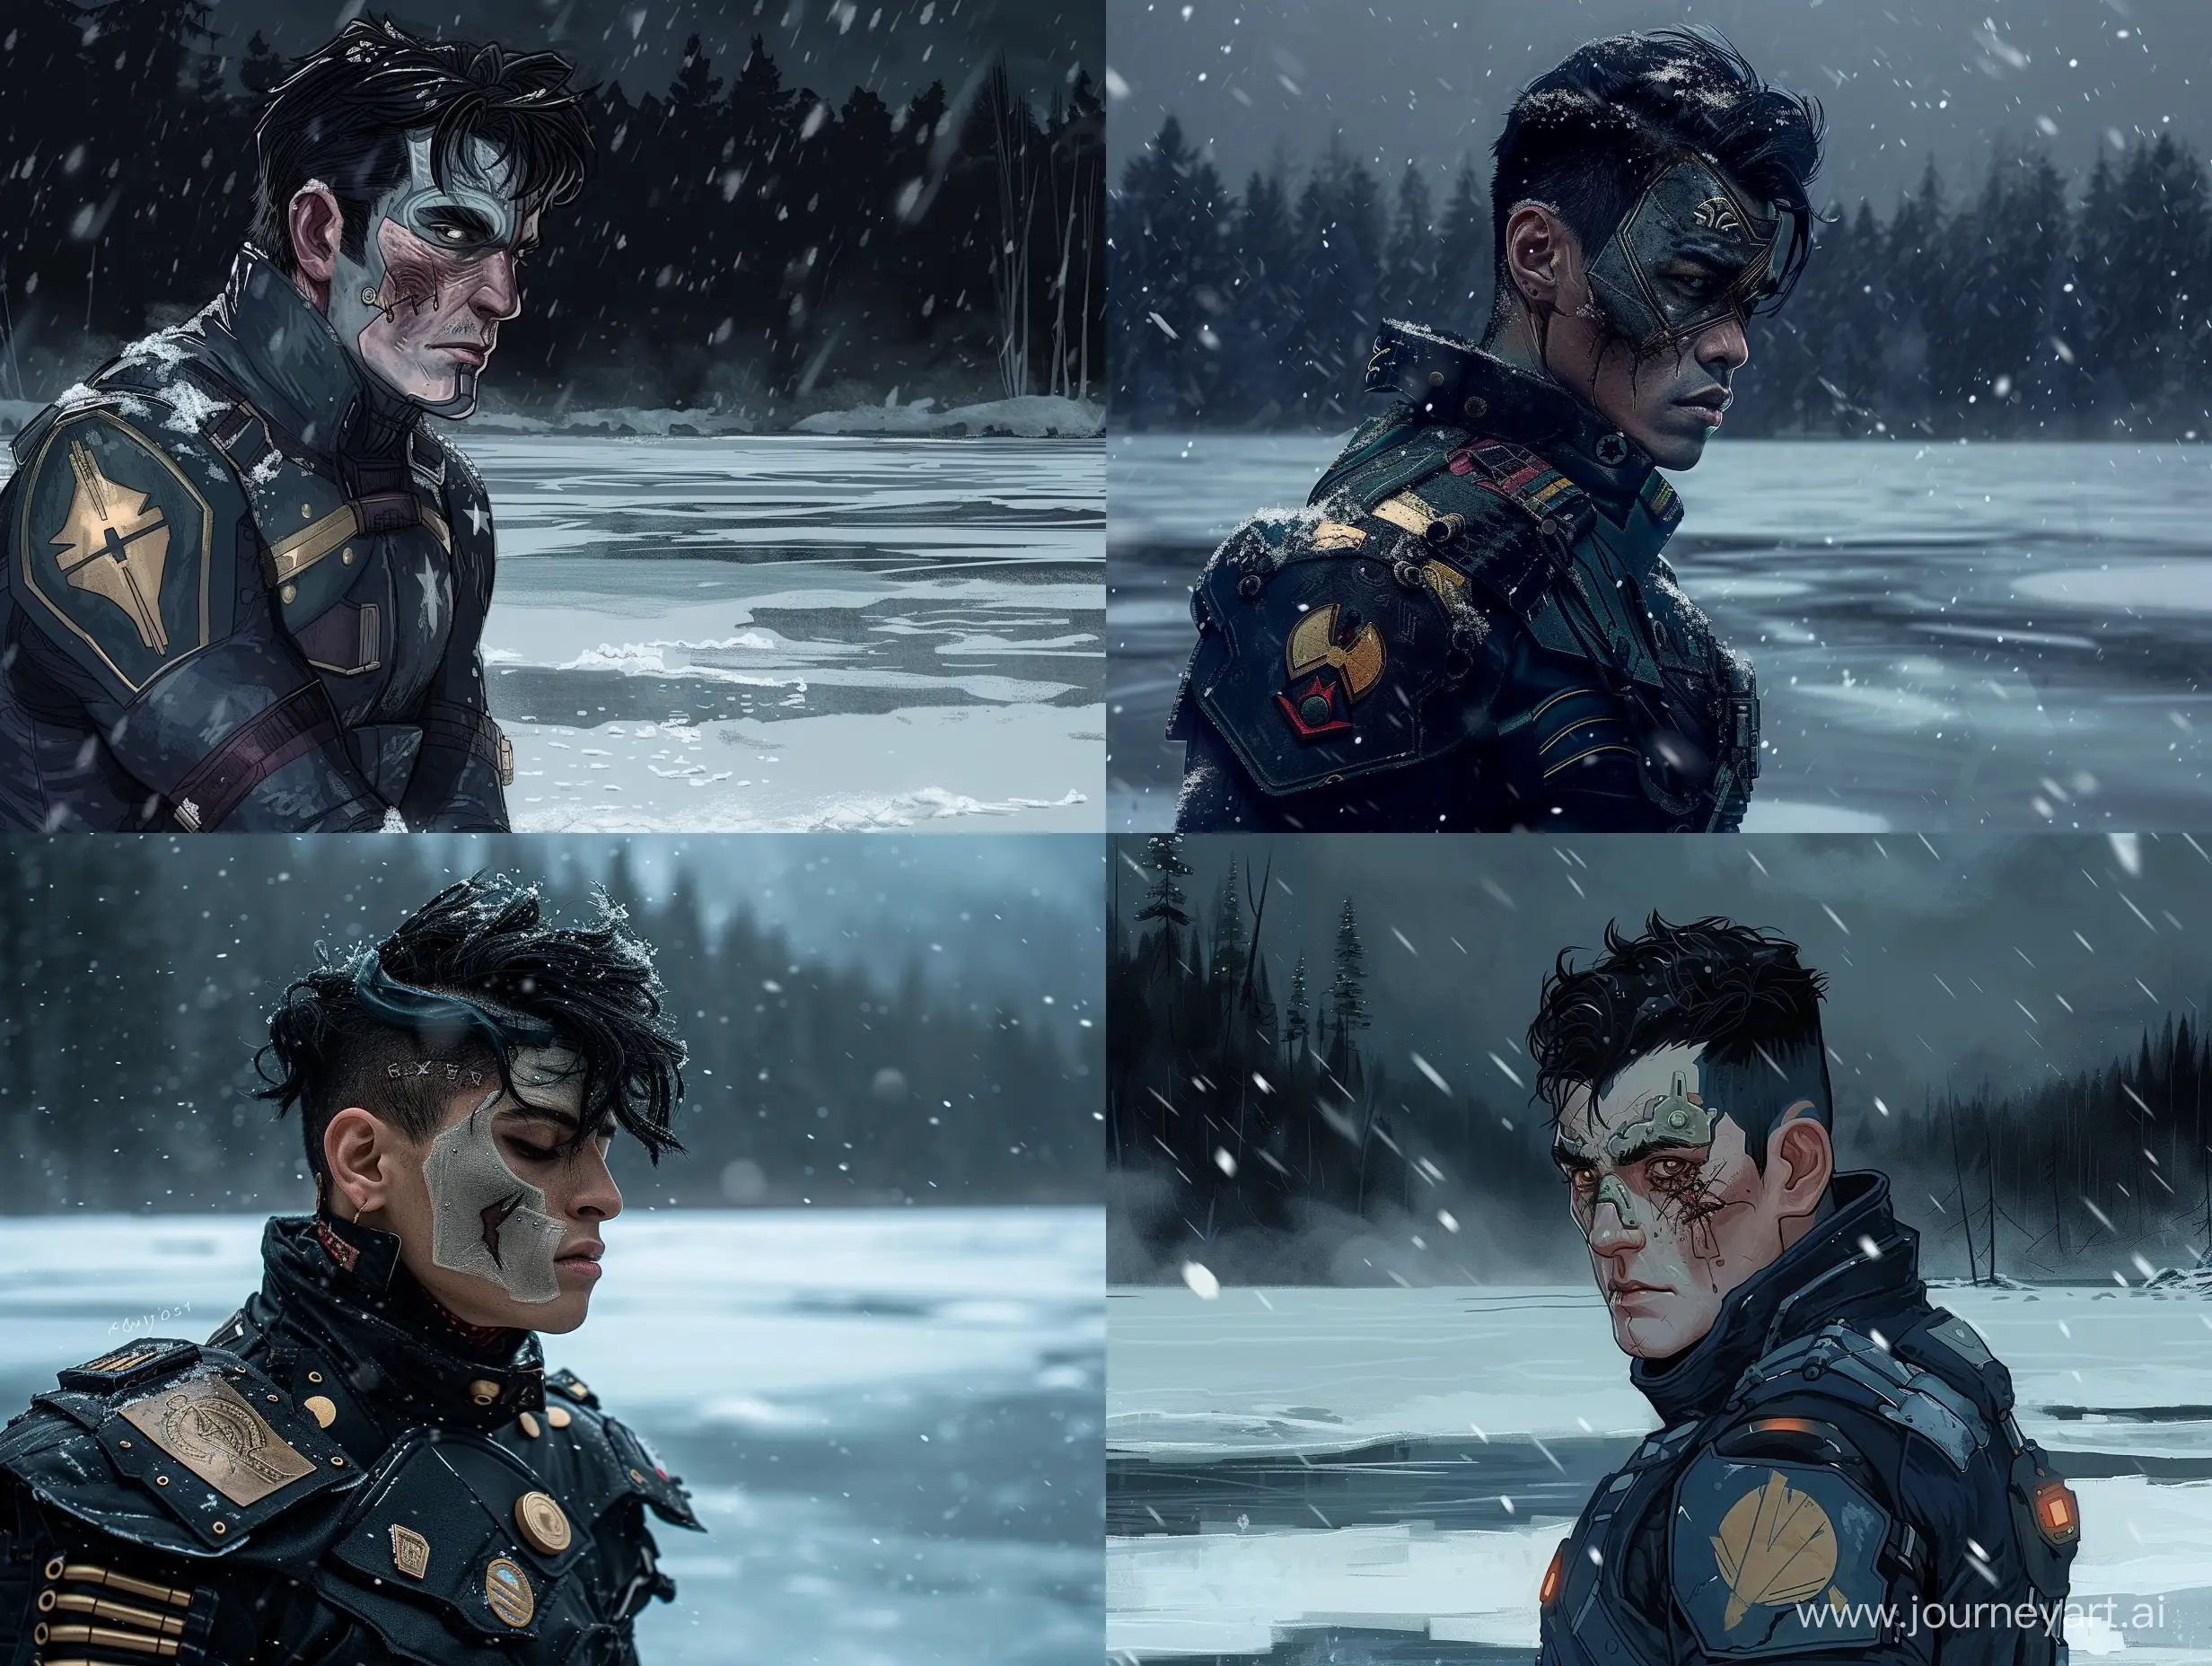 SciFi-Warrior-with-Black-Hair-and-Ancient-Mask-on-Icy-Lake